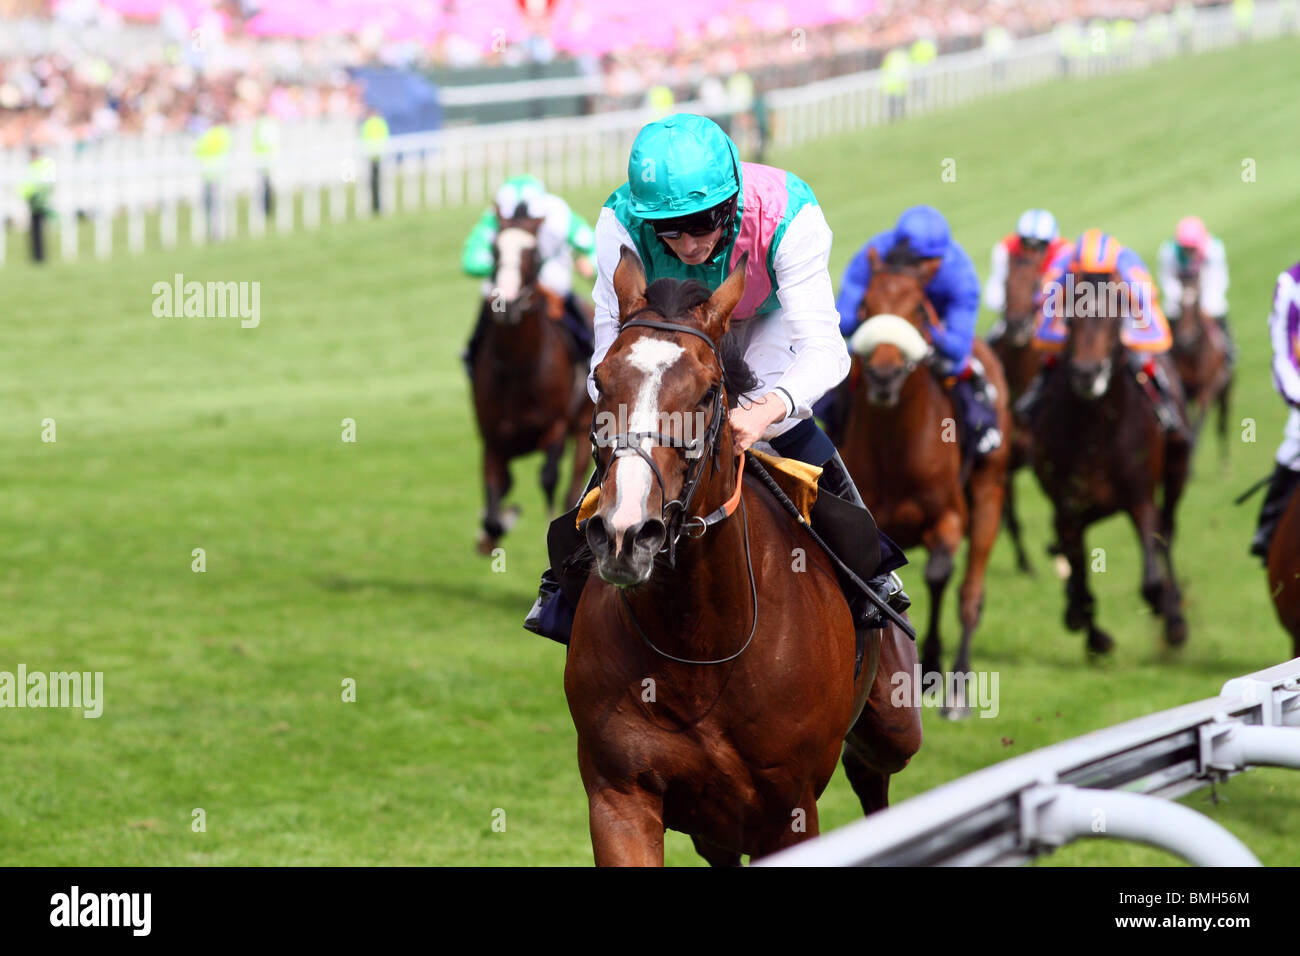 Workforce, ridden by Ryan Moore (green hat) wins the Investec Derby horserace at Epsom, Surrey, UK. Stock Photo